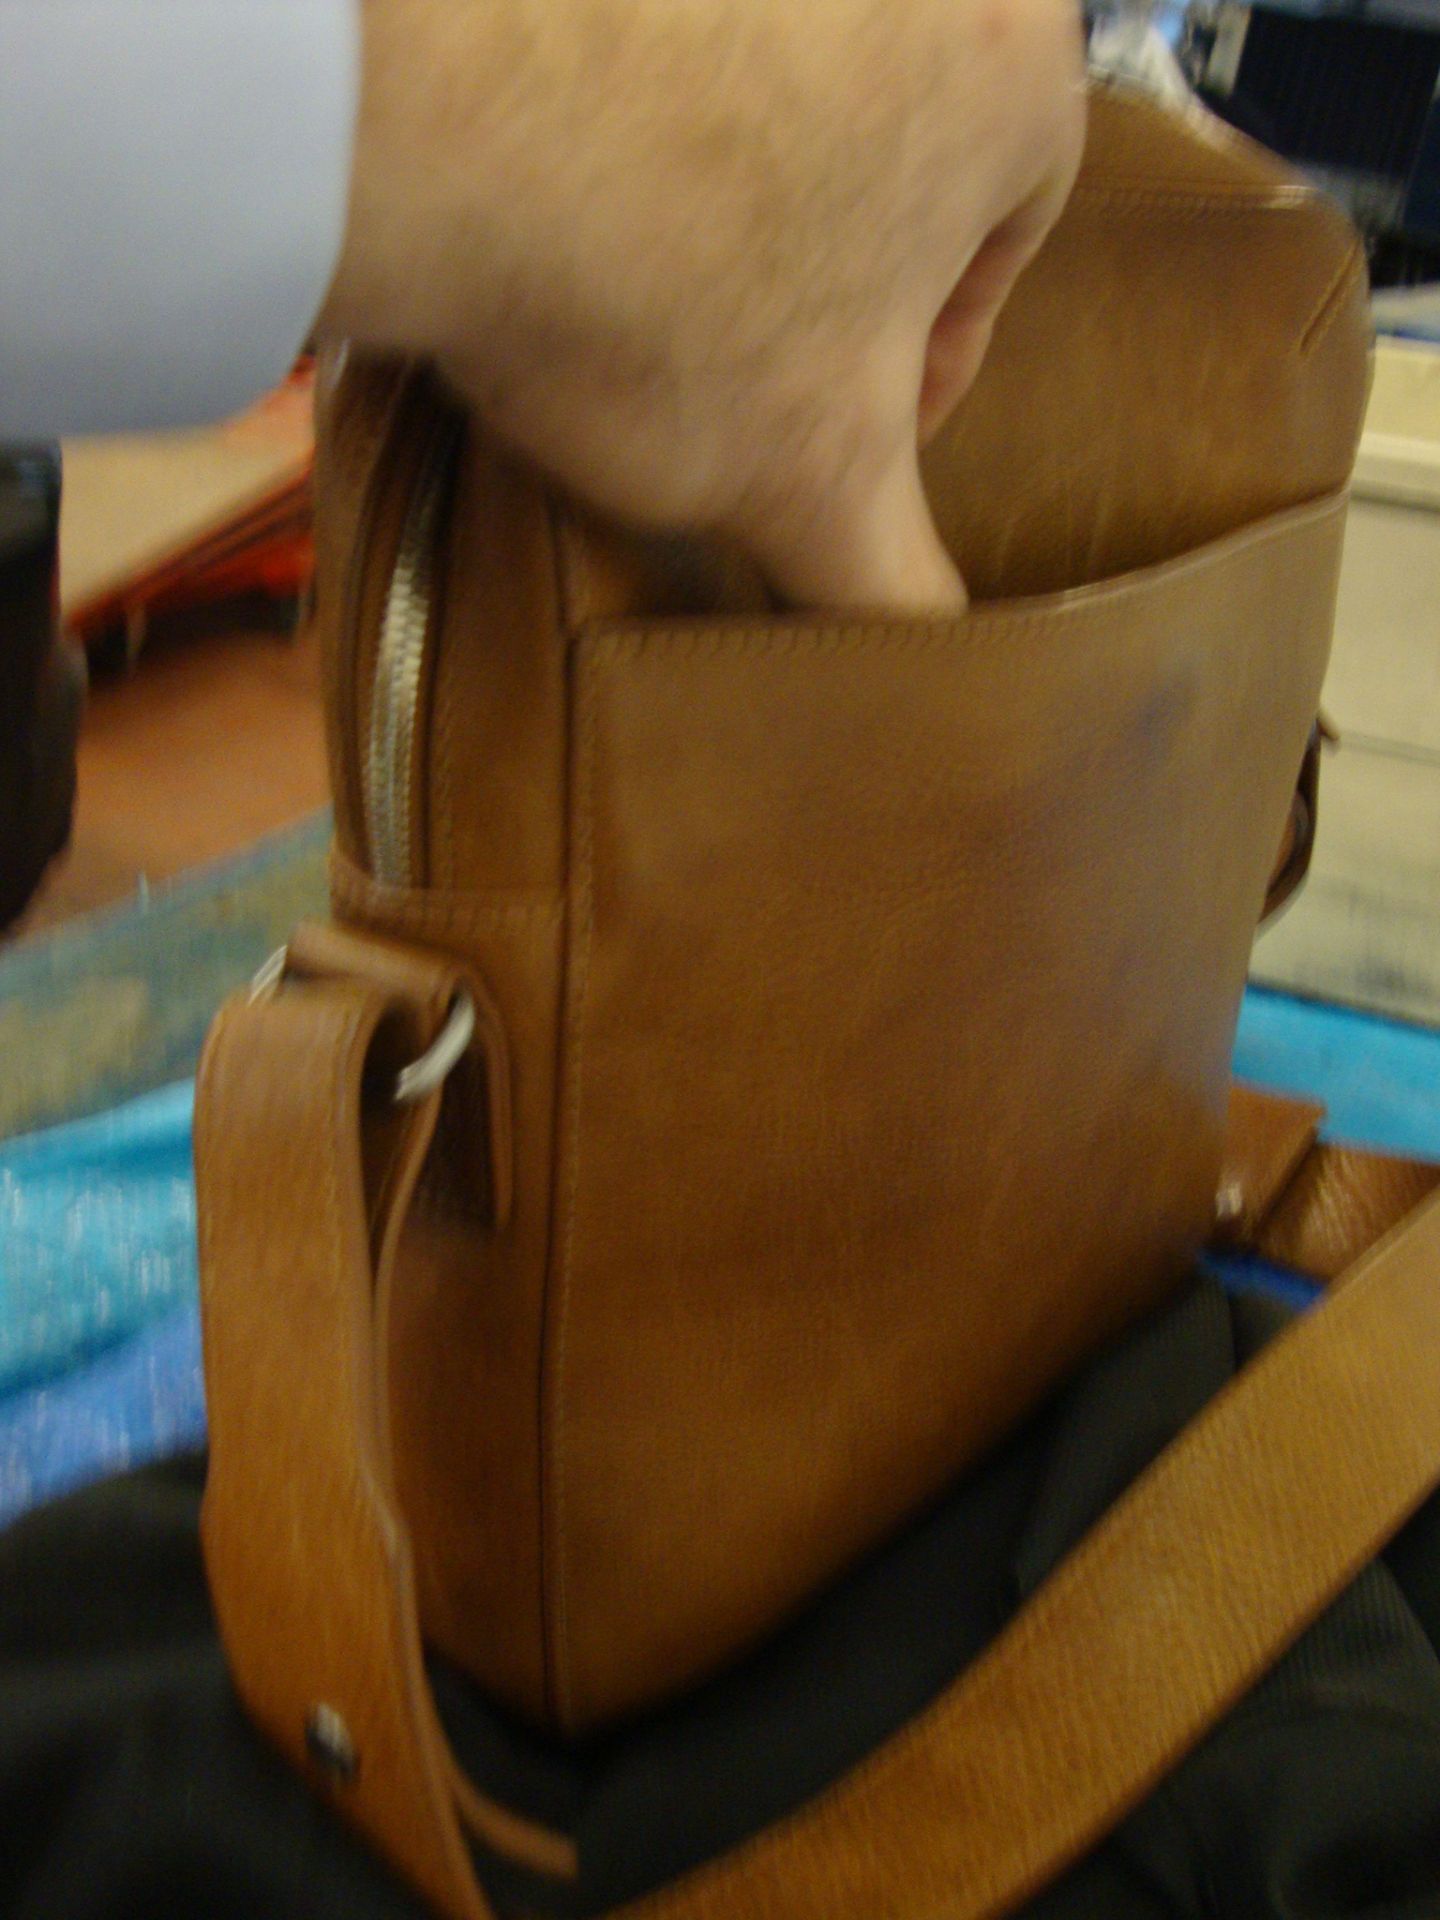 Dunhill chestnut tan leather men's messenger bag with multitude of exterior and interior pockets and - Image 4 of 5